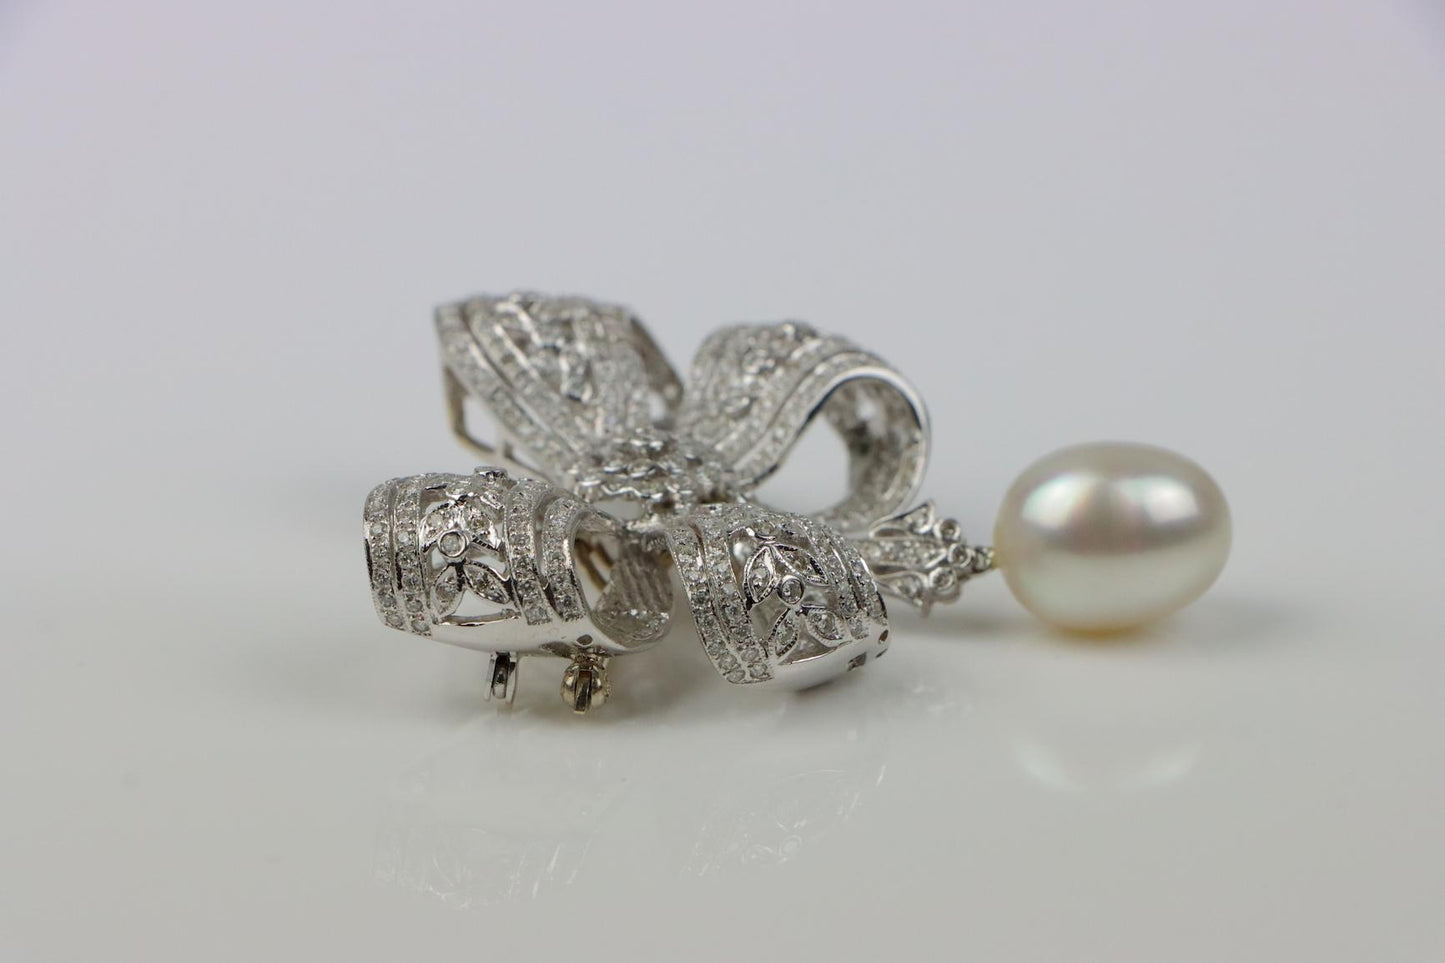 Vintage 18K White Gold Diamond Pearl Bow Tie Brooch Pin